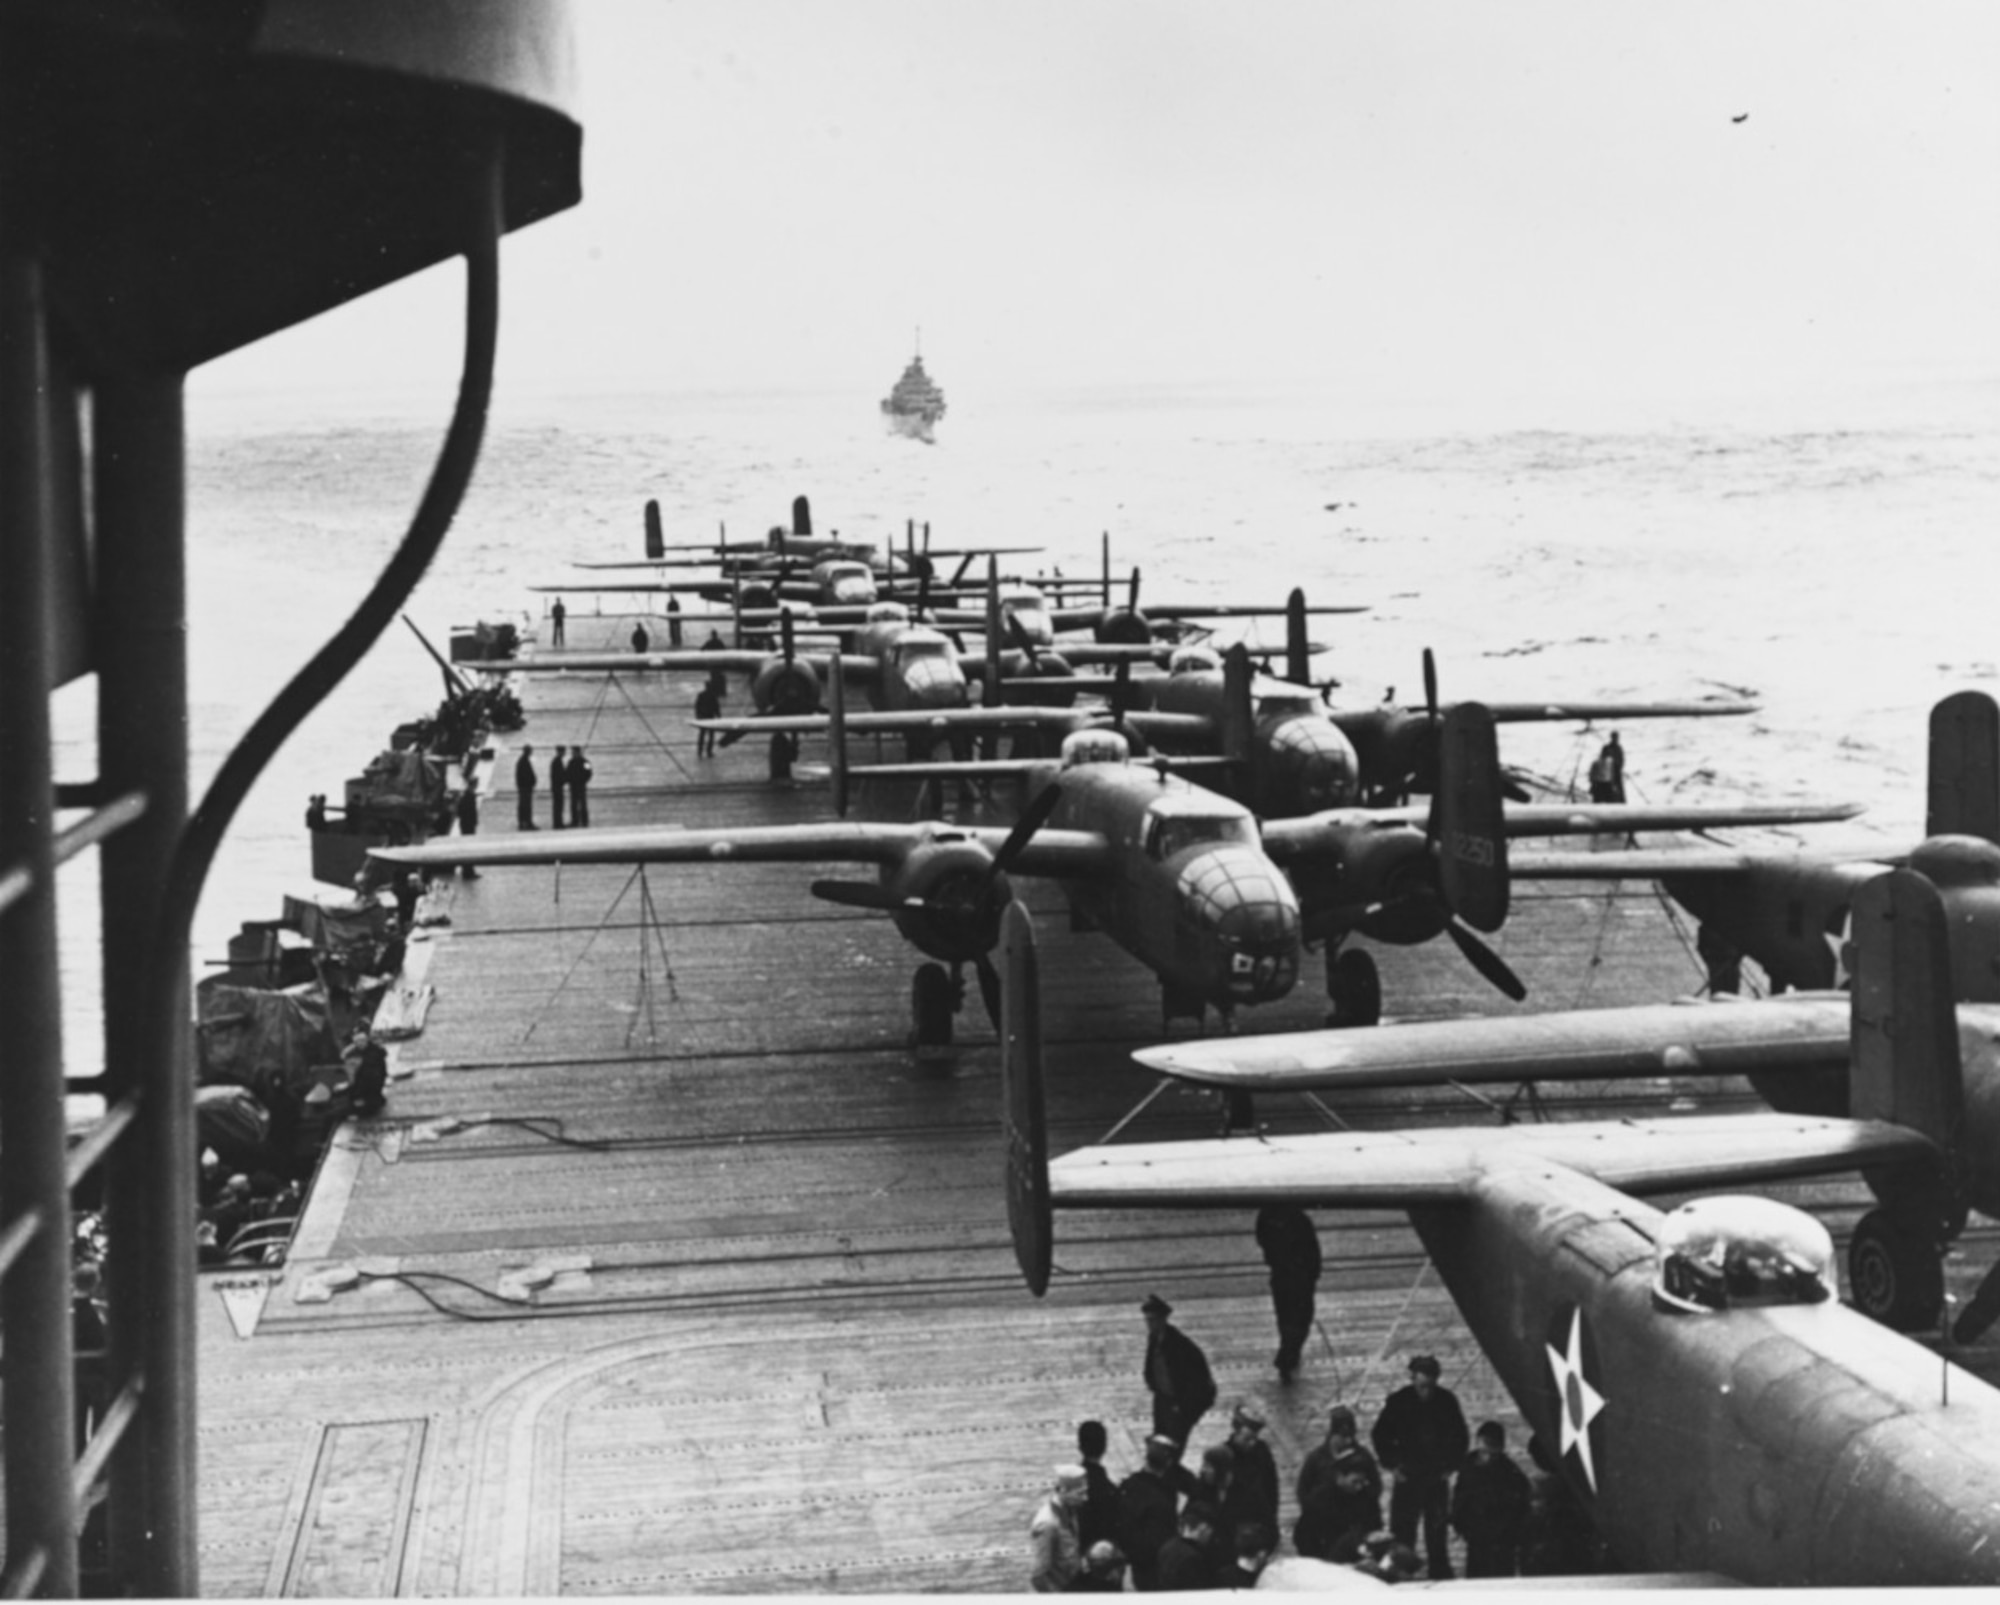 On 18 April 1942, airmen of the US Army Air Forces, led by Lt. Col. James H. (Jimmy) Doolittle, carried the Battle of the Pacific to the heart of the Japanese empire with a surprising and daring raid on military targets at Tokyo, Yokohama, Yokosuka, Nagoya, and Kobe. This heroic attack against these major cities was the result of coordination between the Army Air Forces and the US Navy, which carried the sixteen North American B-25 medium bombers aboard the carrier USS Hornet to within take-off distance of the Japanese Islands. Here, a pair of alert escorts follow the USS Hornet to protect her lethal cargo of B-25 bombers. The aircraft carrier Hornet had 16 AAF B-25s on deck, ready for the Tokyo Raid.(U.S. Air Force photo)